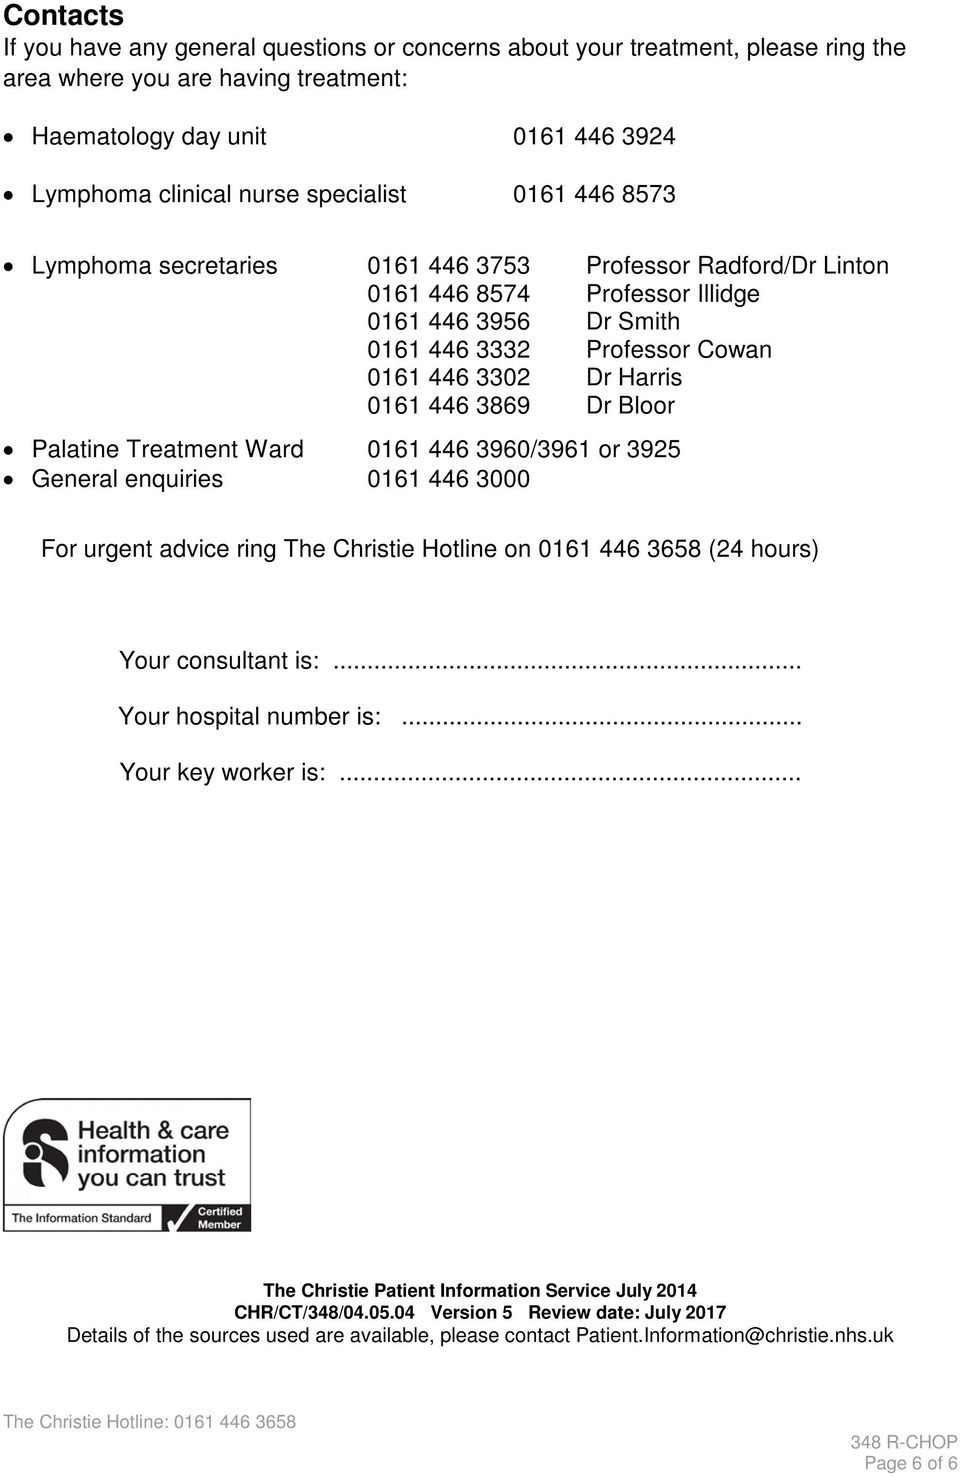 Dr Bloor Palatine Treatment Ward 0161 446 3960/3961 or 3925 General enquiries 0161 446 3000 For urgent advice ring The Christie Hotline on 0161 446 3658 (24 hours) Your consultant is:.